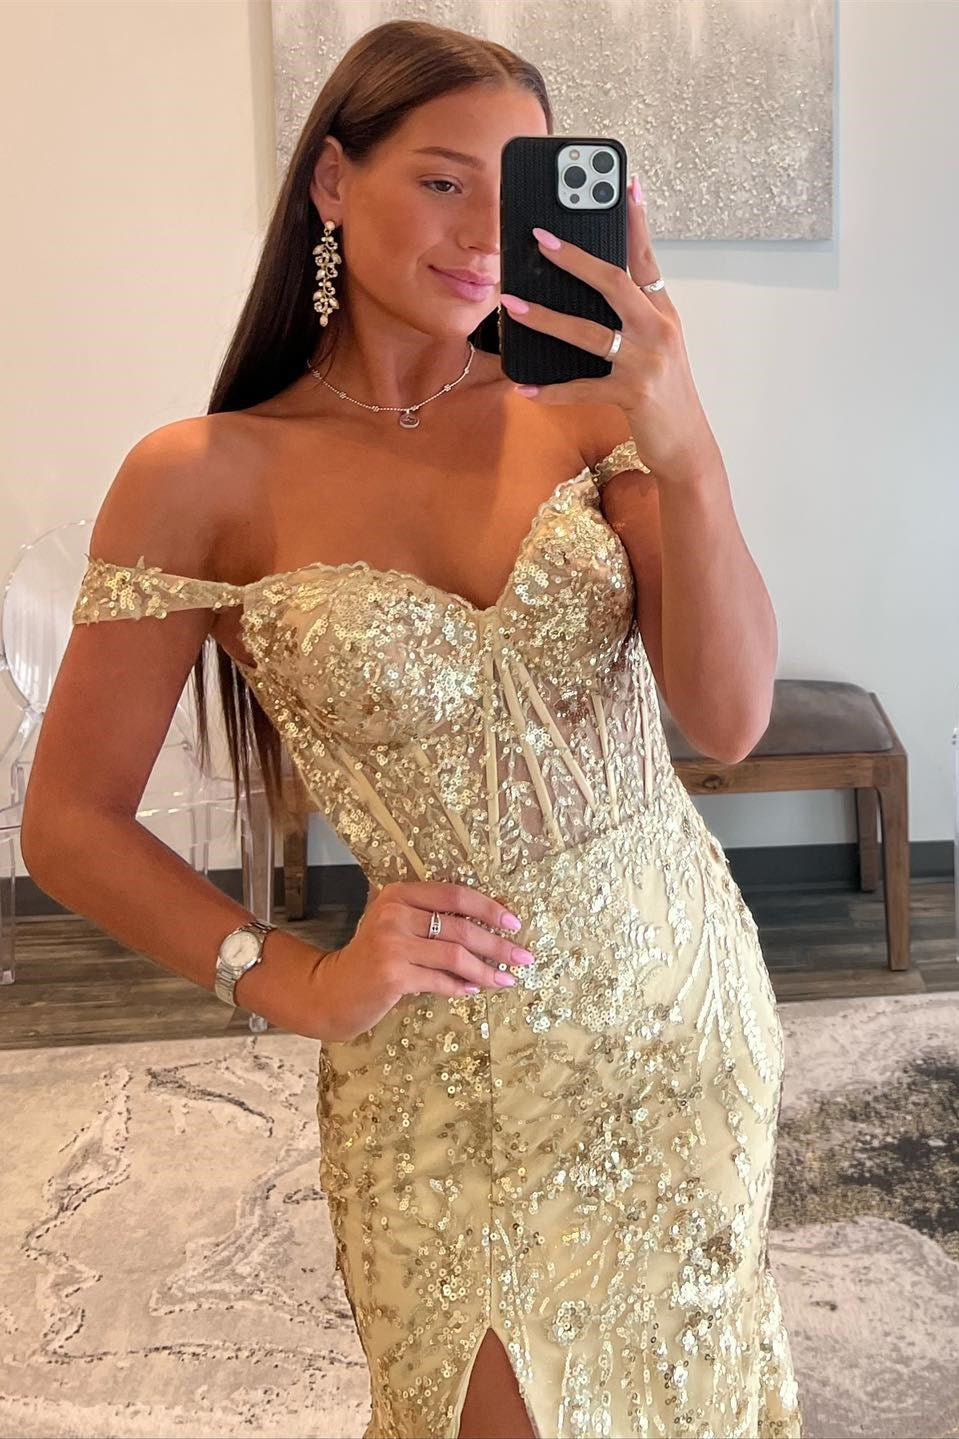 Gold Sequin Lace Off-the-Shoulder Mermaid Long Dress with Slit